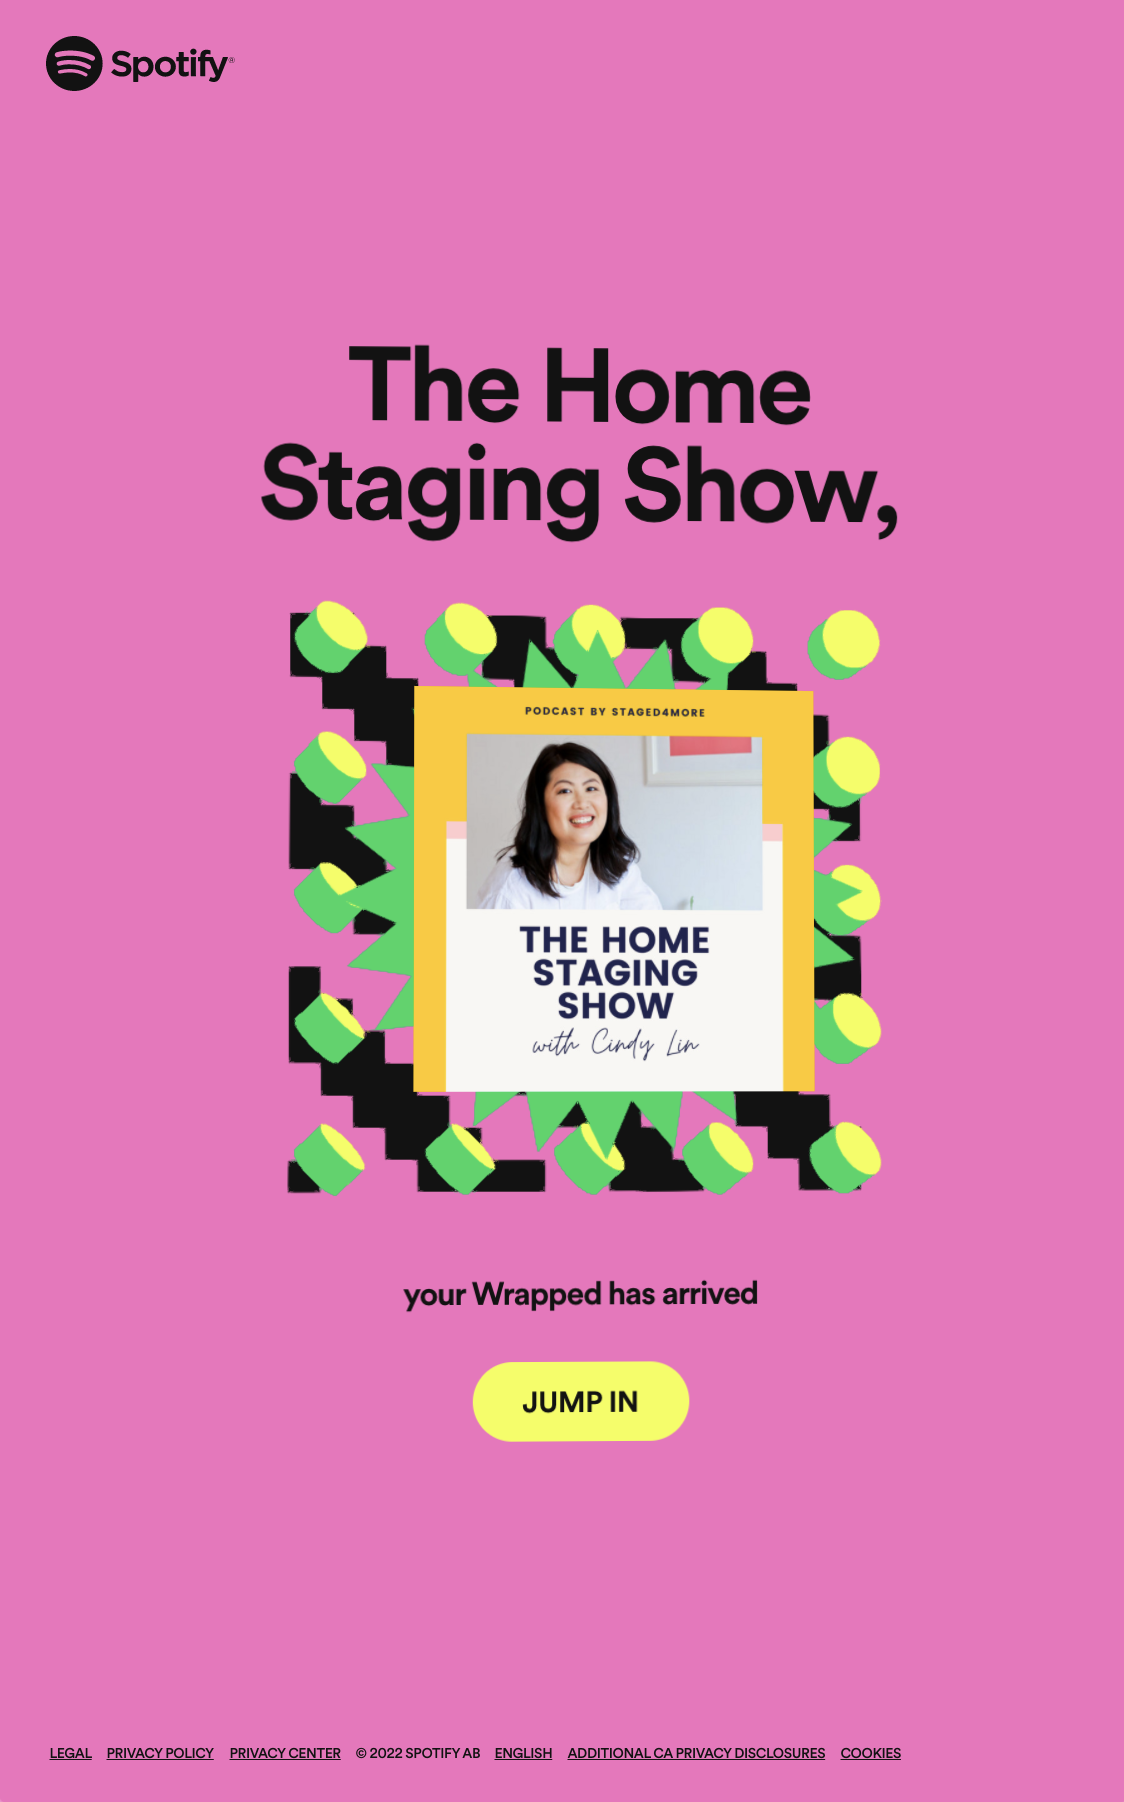 The Home Staging Show Podcast on Spotify 1.png